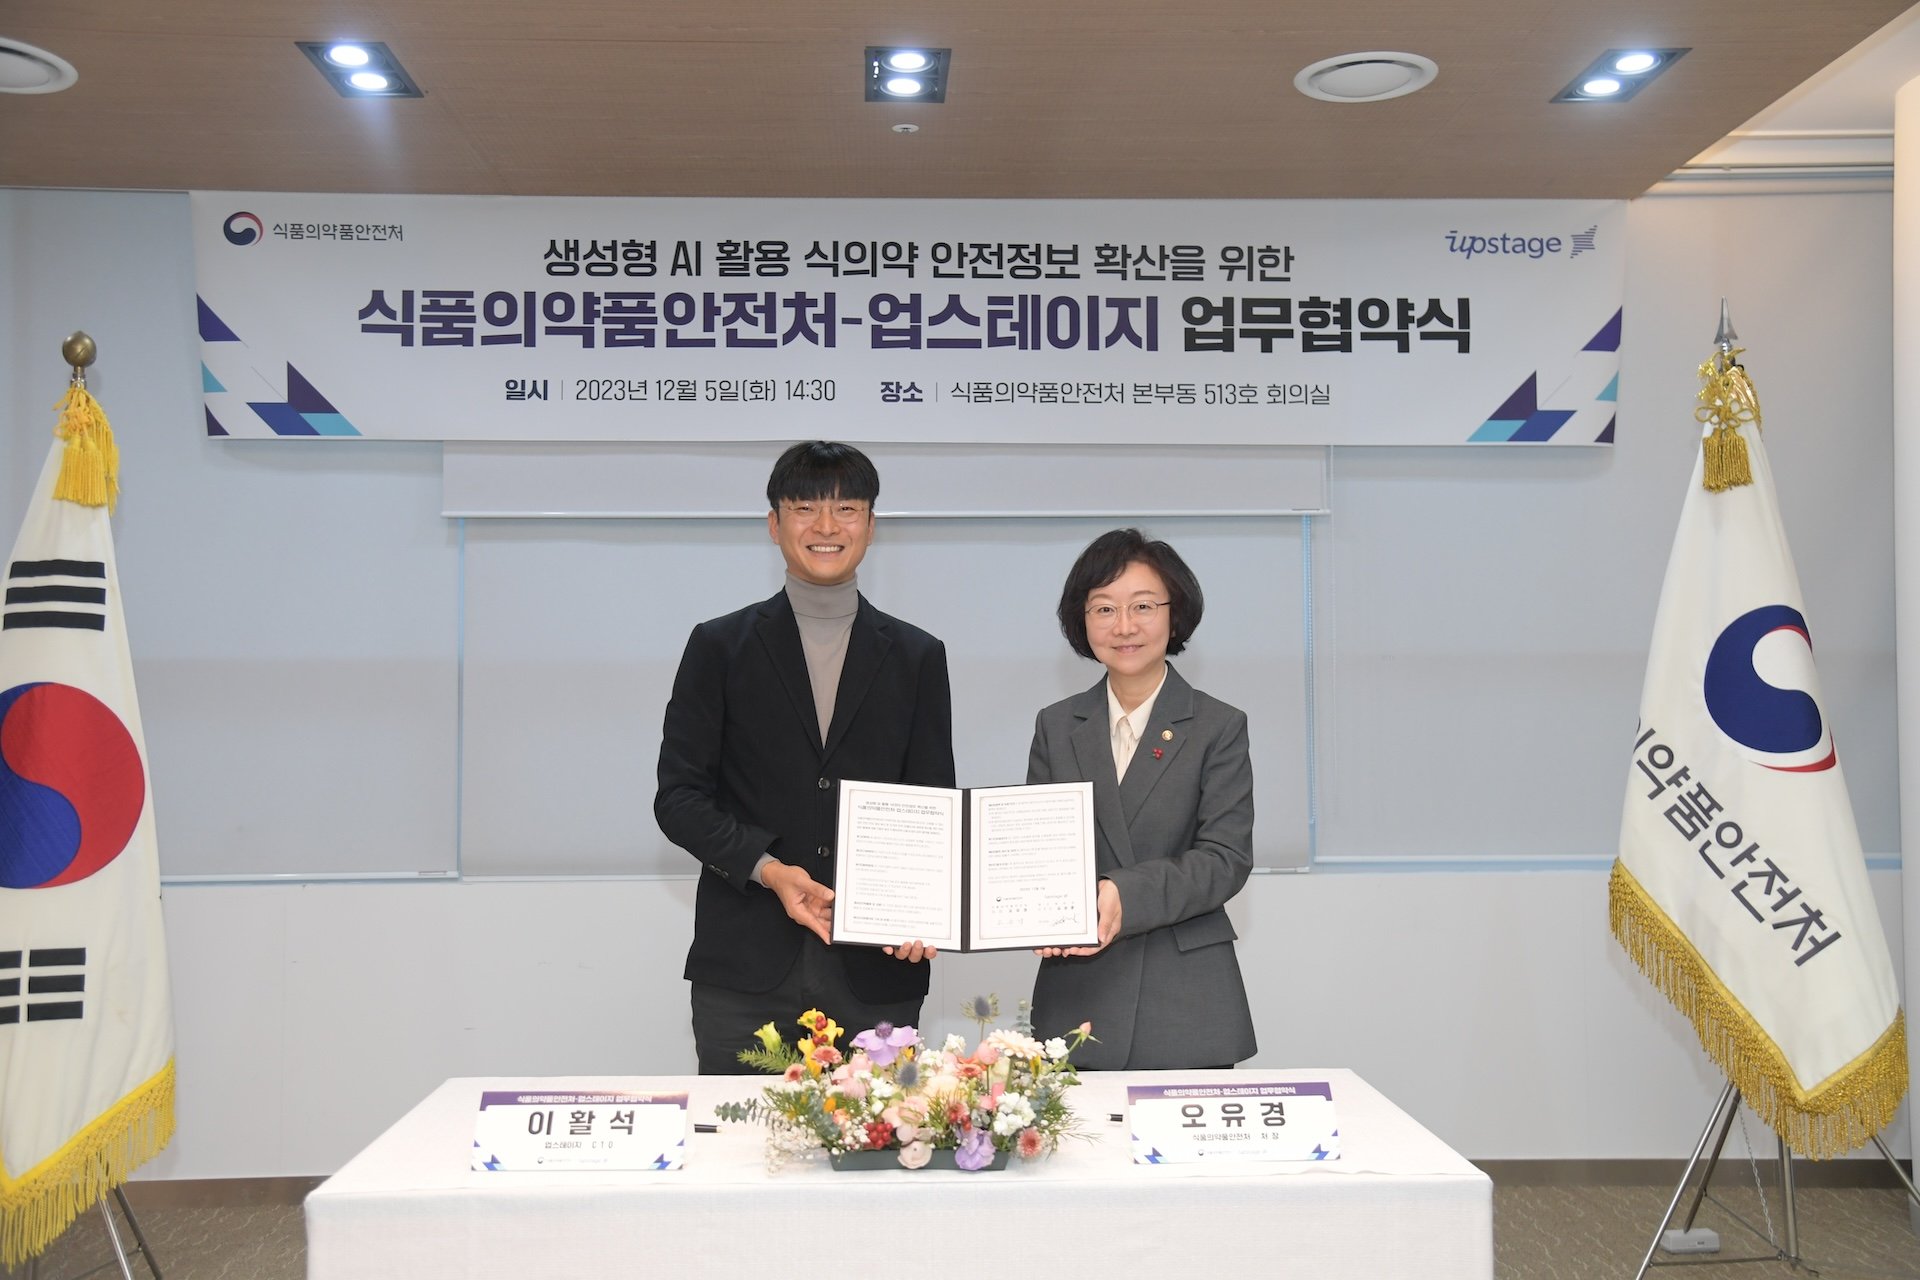 UPSTAGE AND MINISTRY OF FOOD AND DRUG SAFETY CONCLUDE BUSINESS AGREEMENT TO INNOVATE PUBLIC SERVICES USING GENERATIVE AI